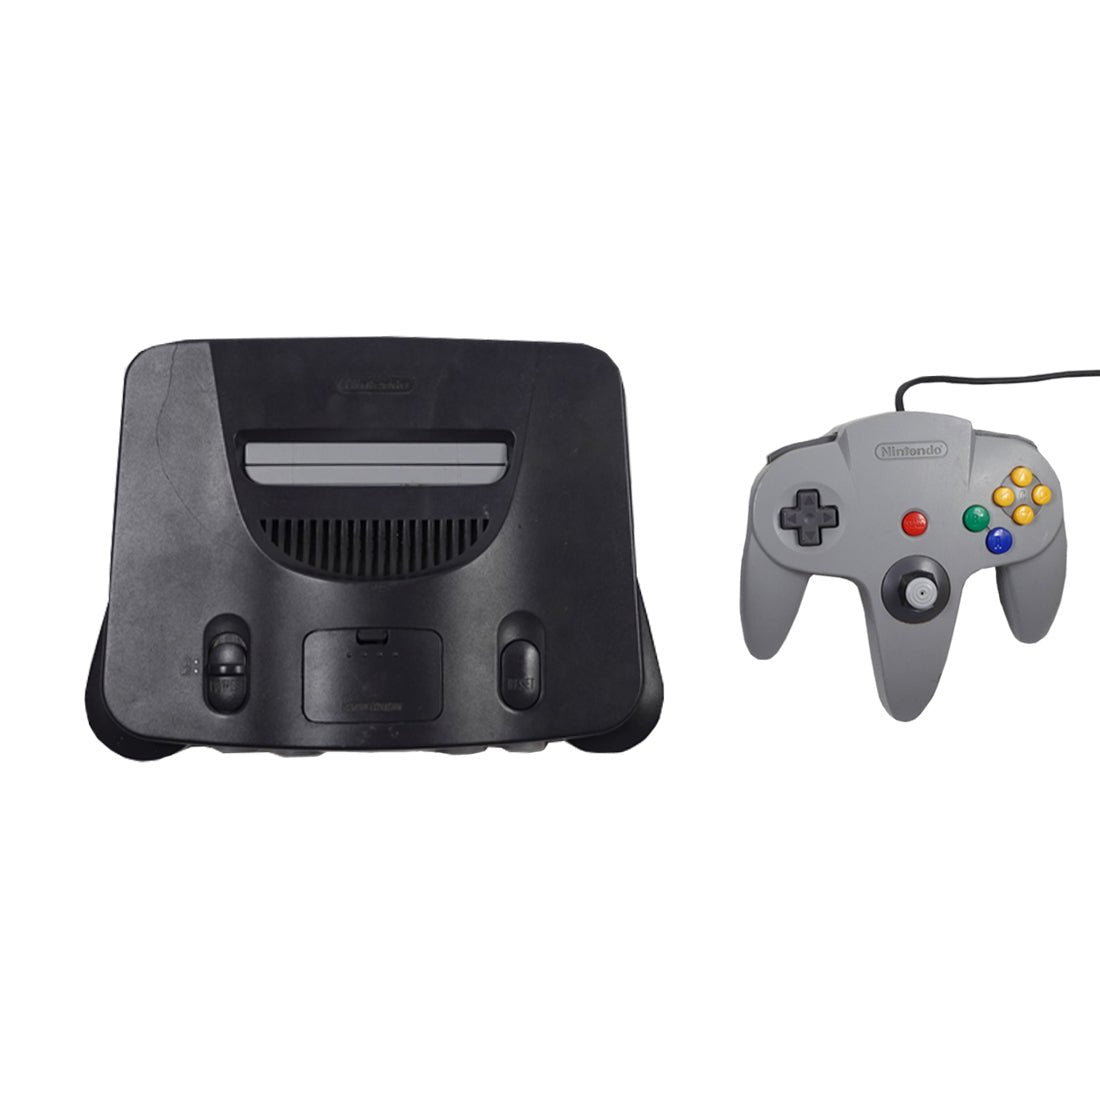 (Pre-Owned) Nintendo 64 Video Game Console - Grey - Store 974 | ستور ٩٧٤